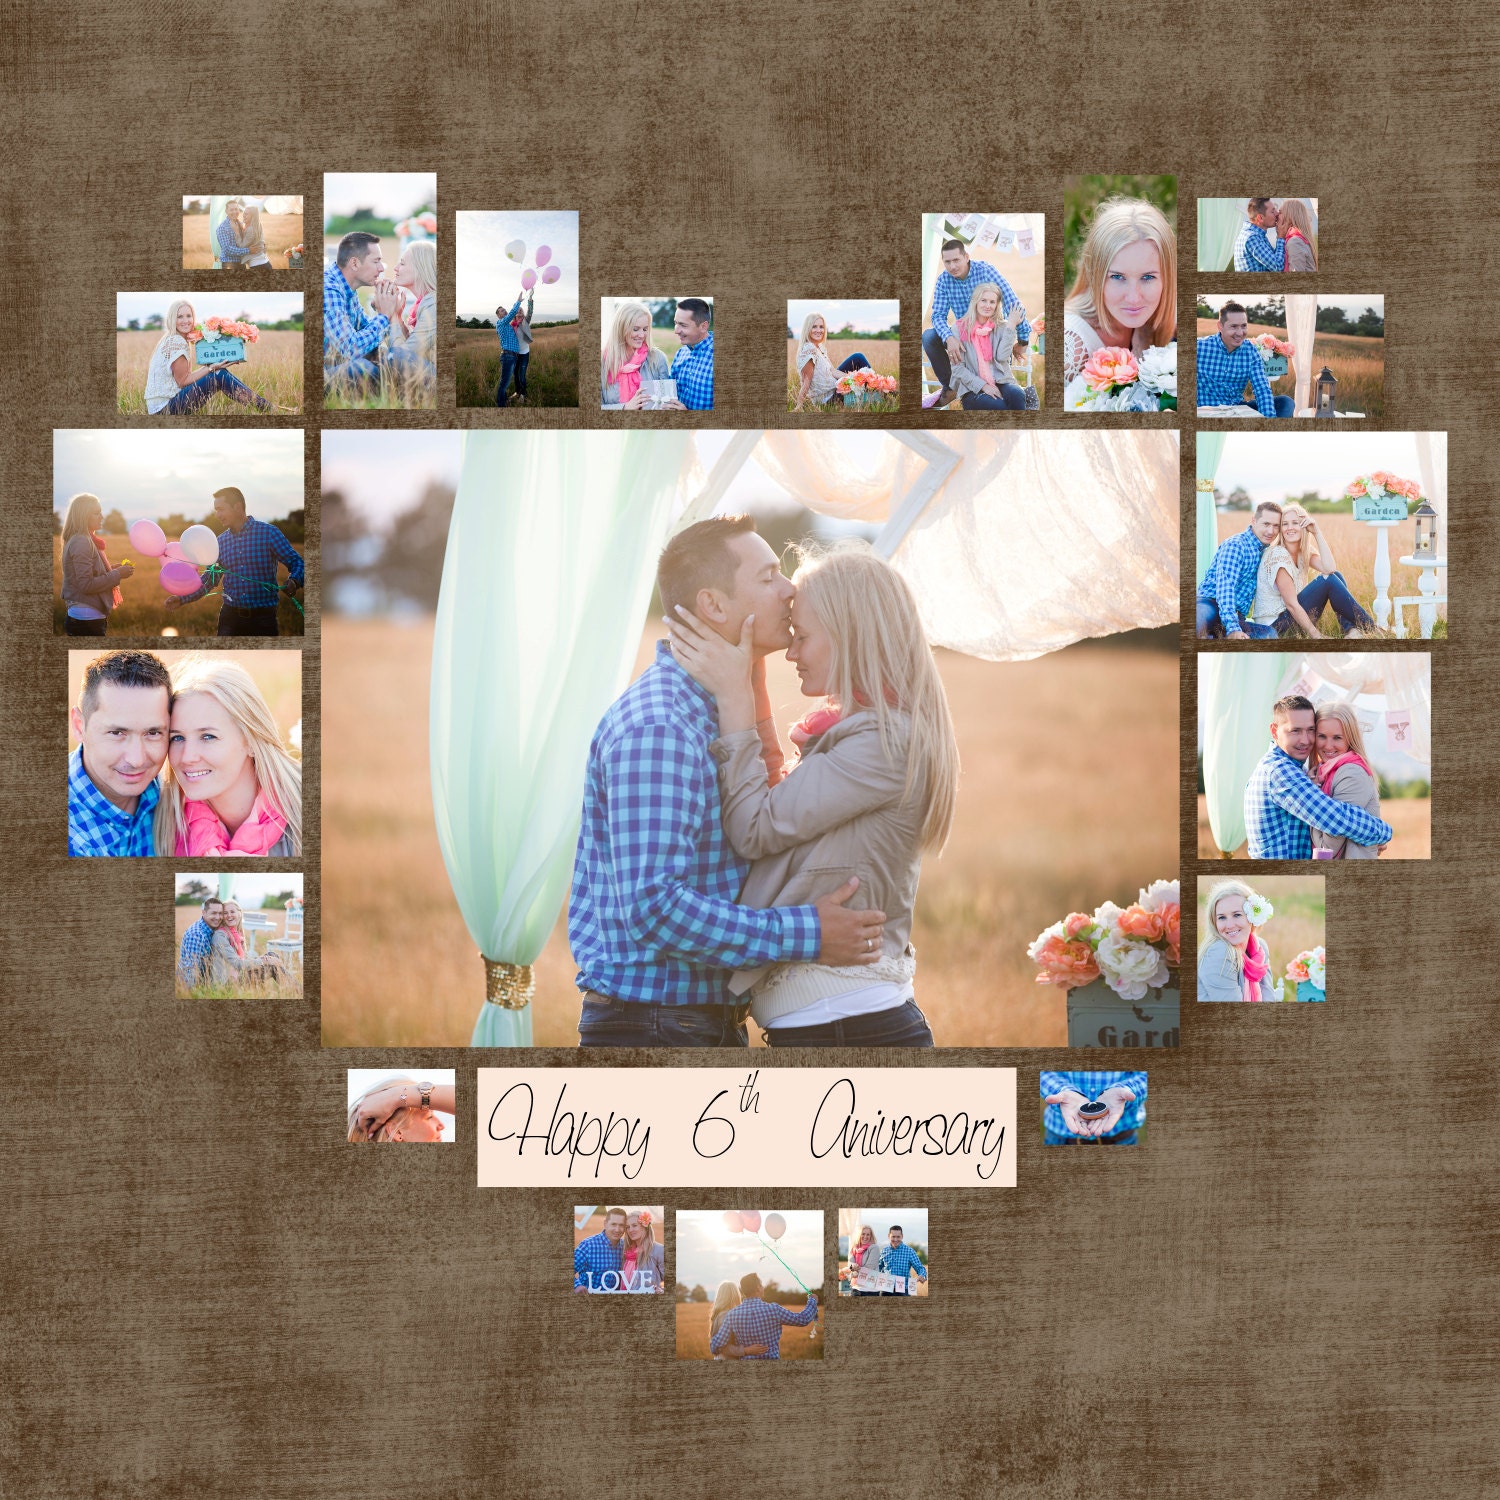 4 Diferent Heart Photo Collage Template PSD. Valentine's